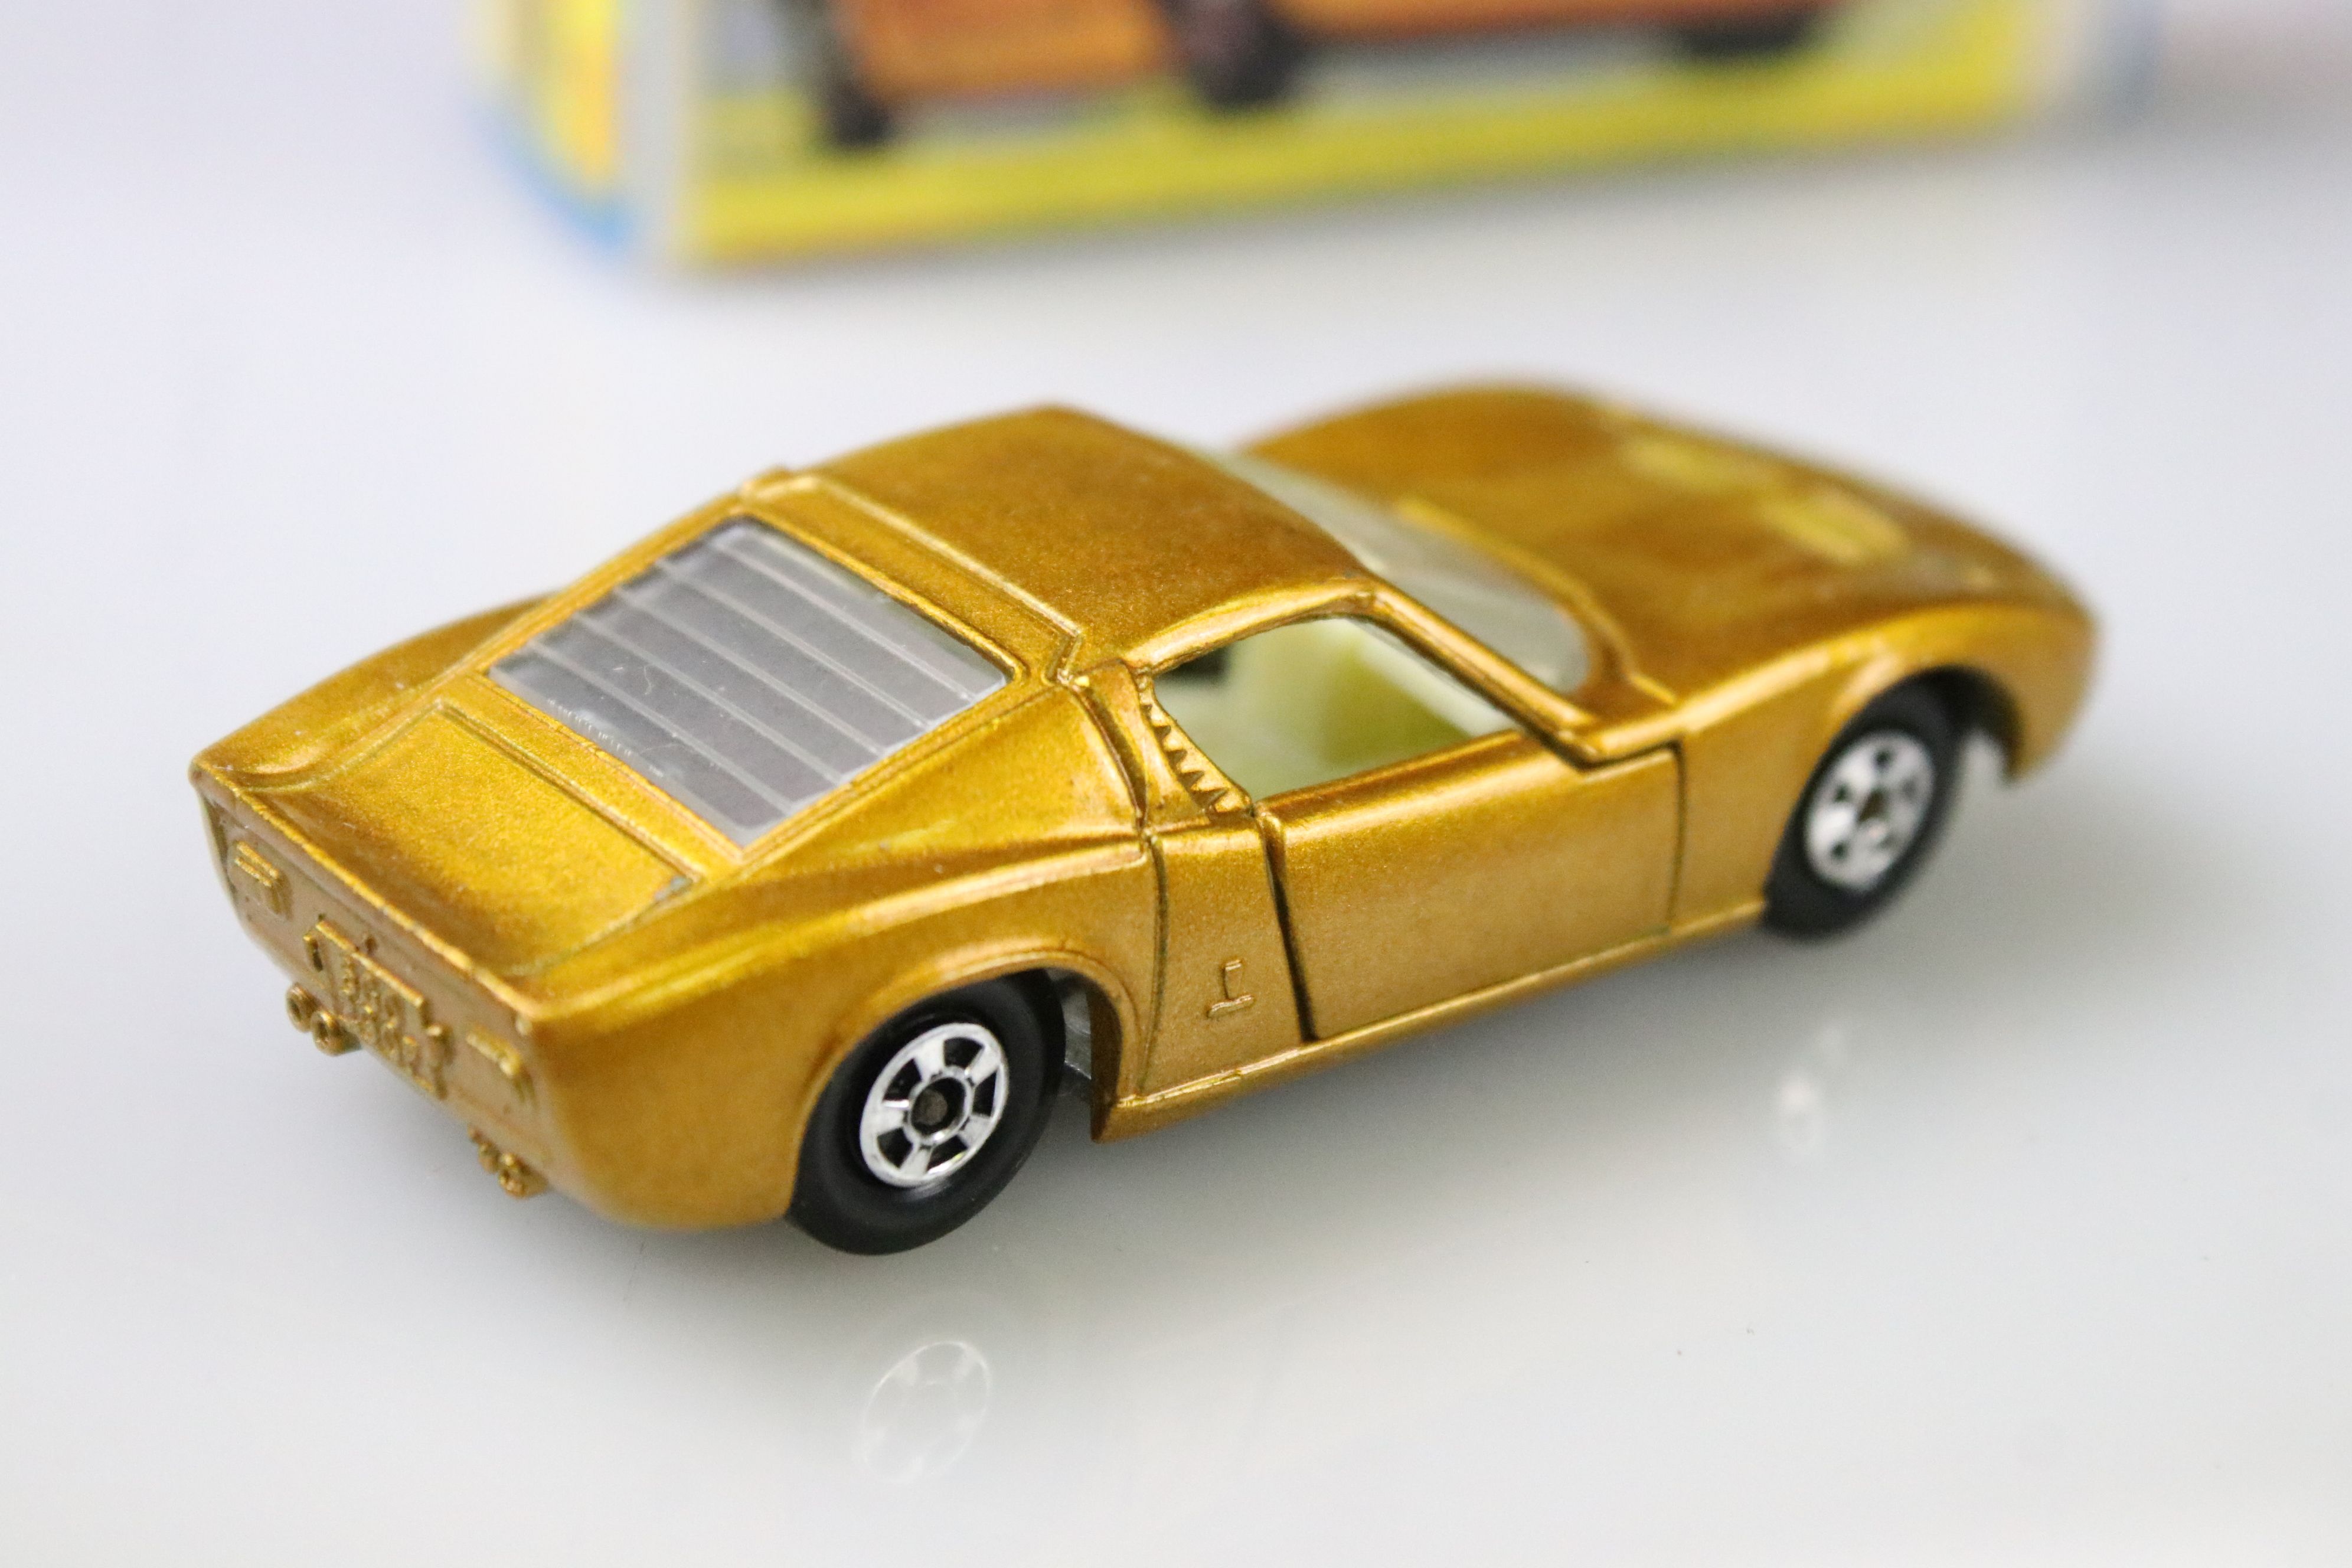 17 Boxed Matchbox Superfast diecast models to include 41 Ford GT, 29 Racing Mini, 57 Landrover - Image 36 of 53